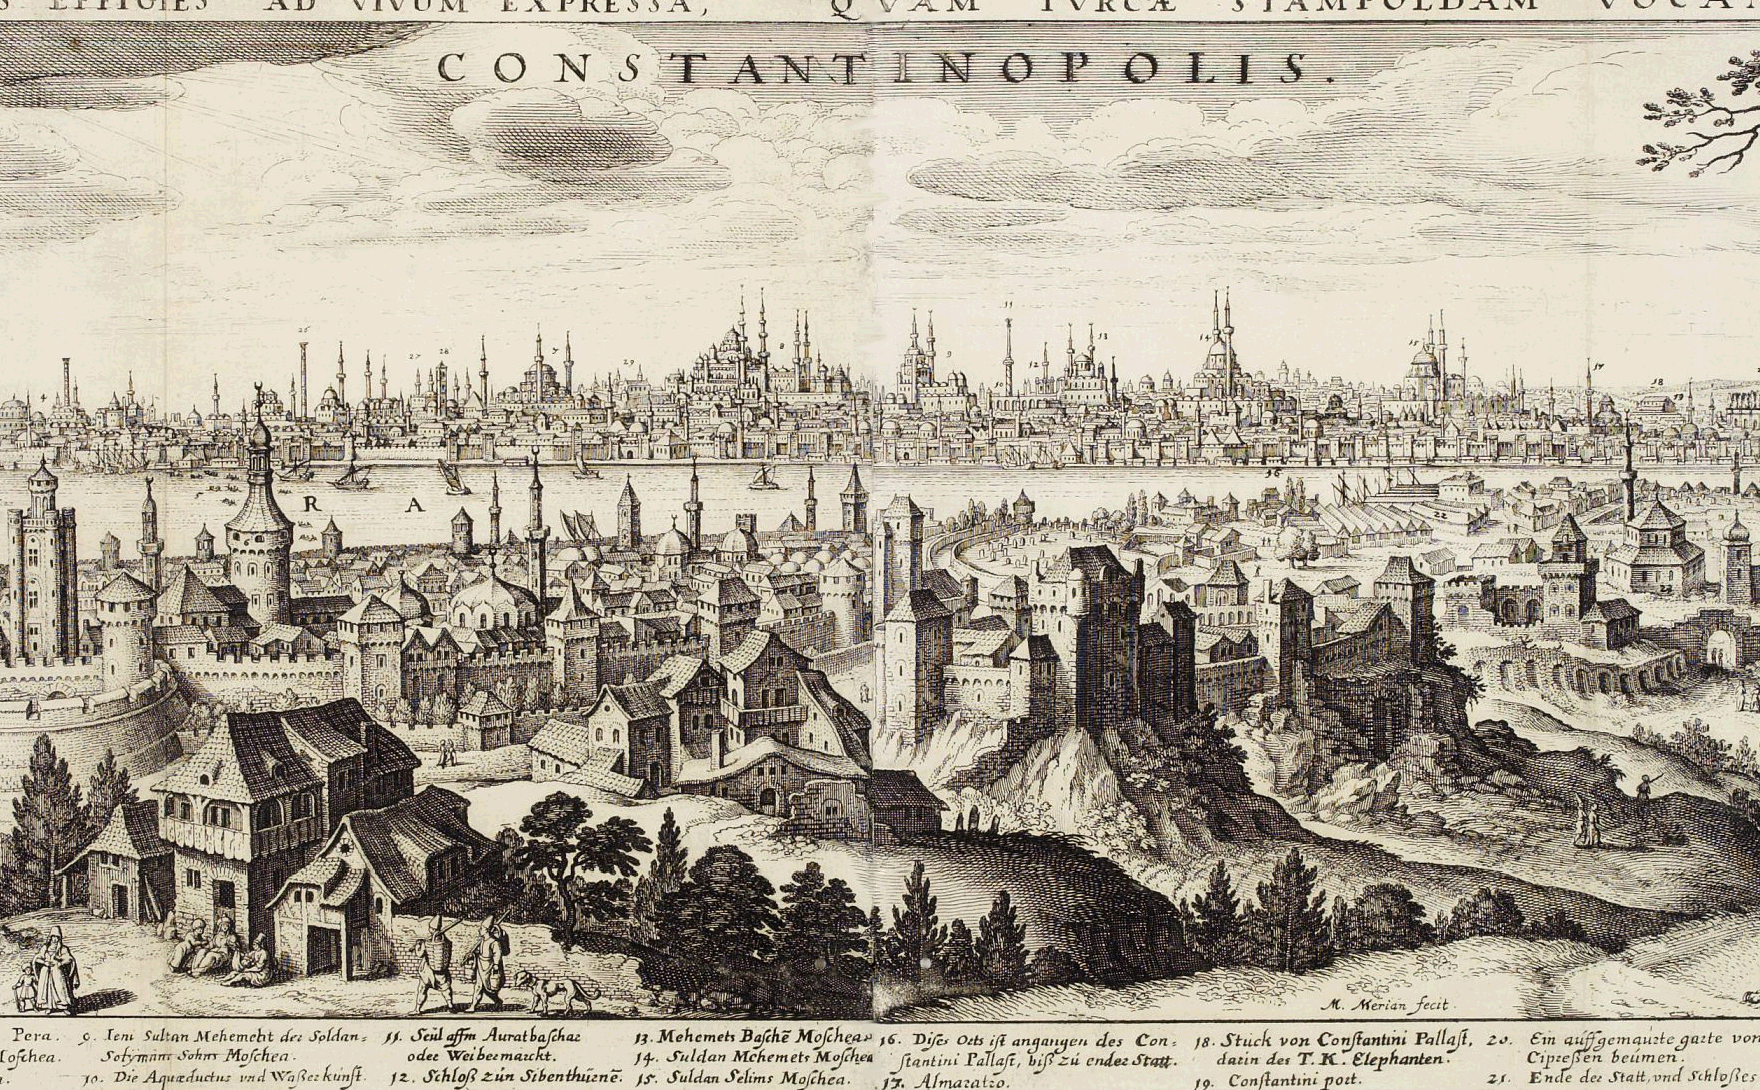 Constantinople in the 17th century.